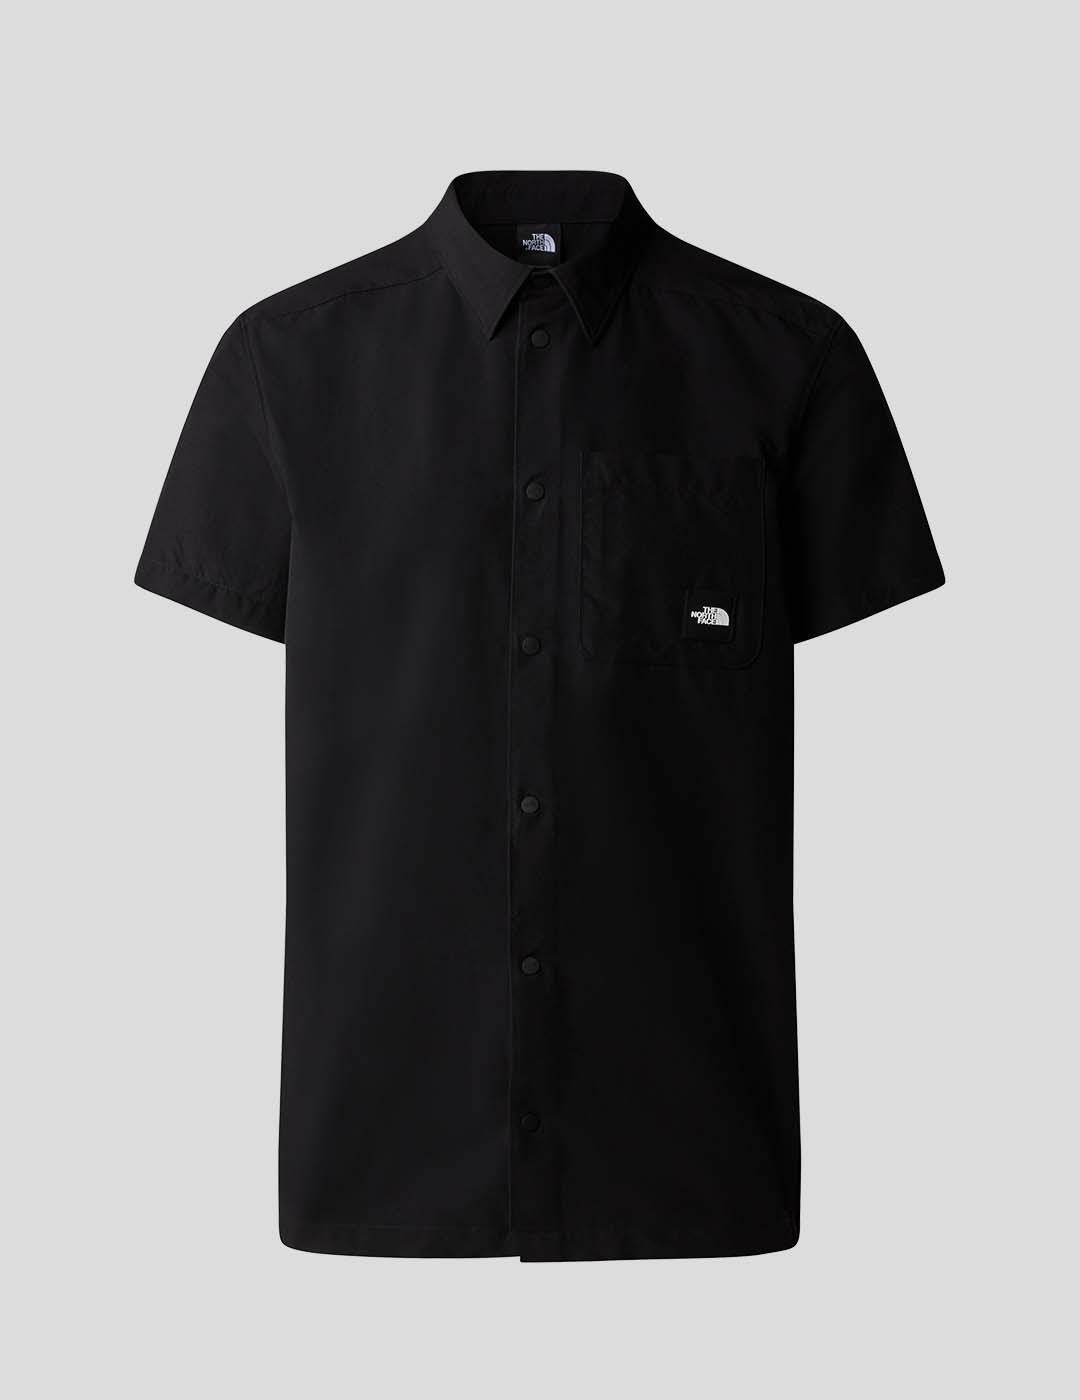 CAMISA THE NORTH FACE MURRAY BUTTON SHIRT   TNF BLACK 